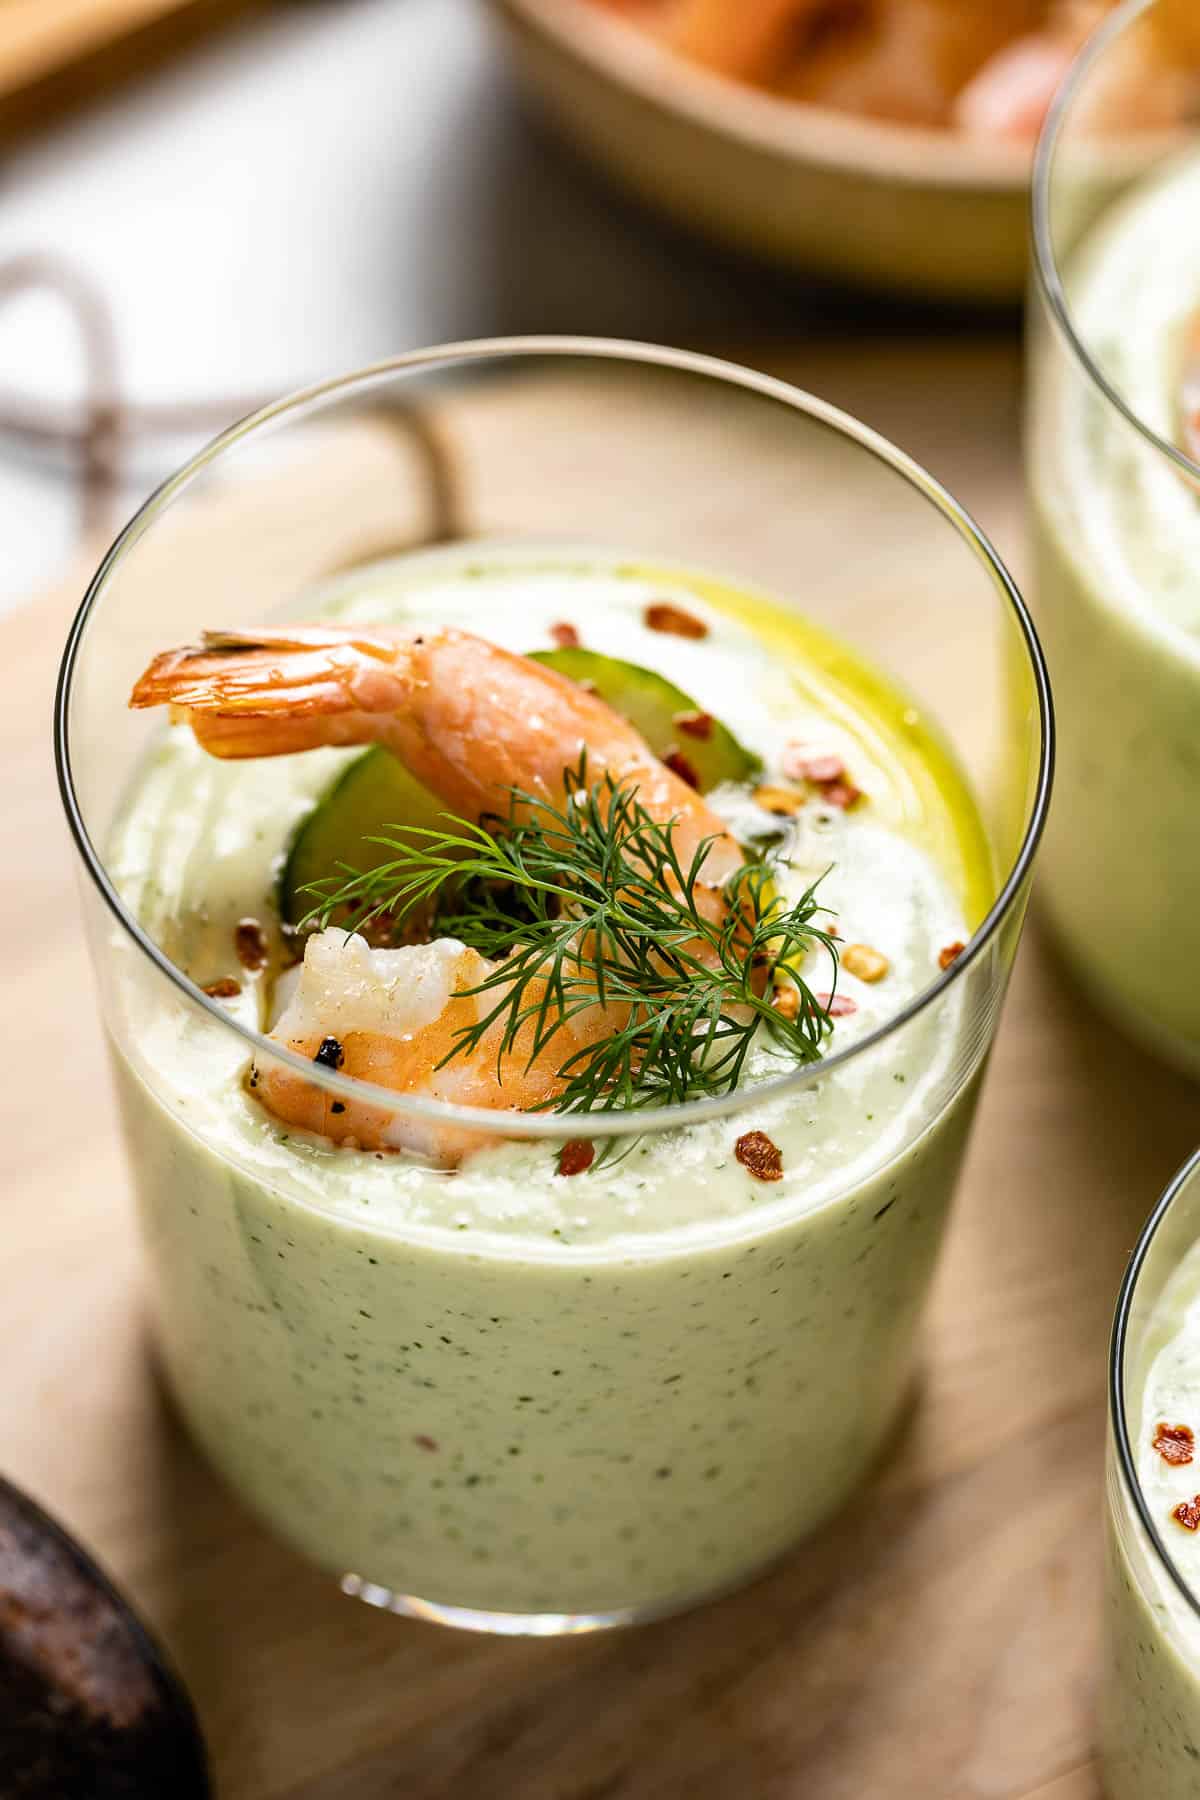 chilled cucumber soup with shrimp from the front view